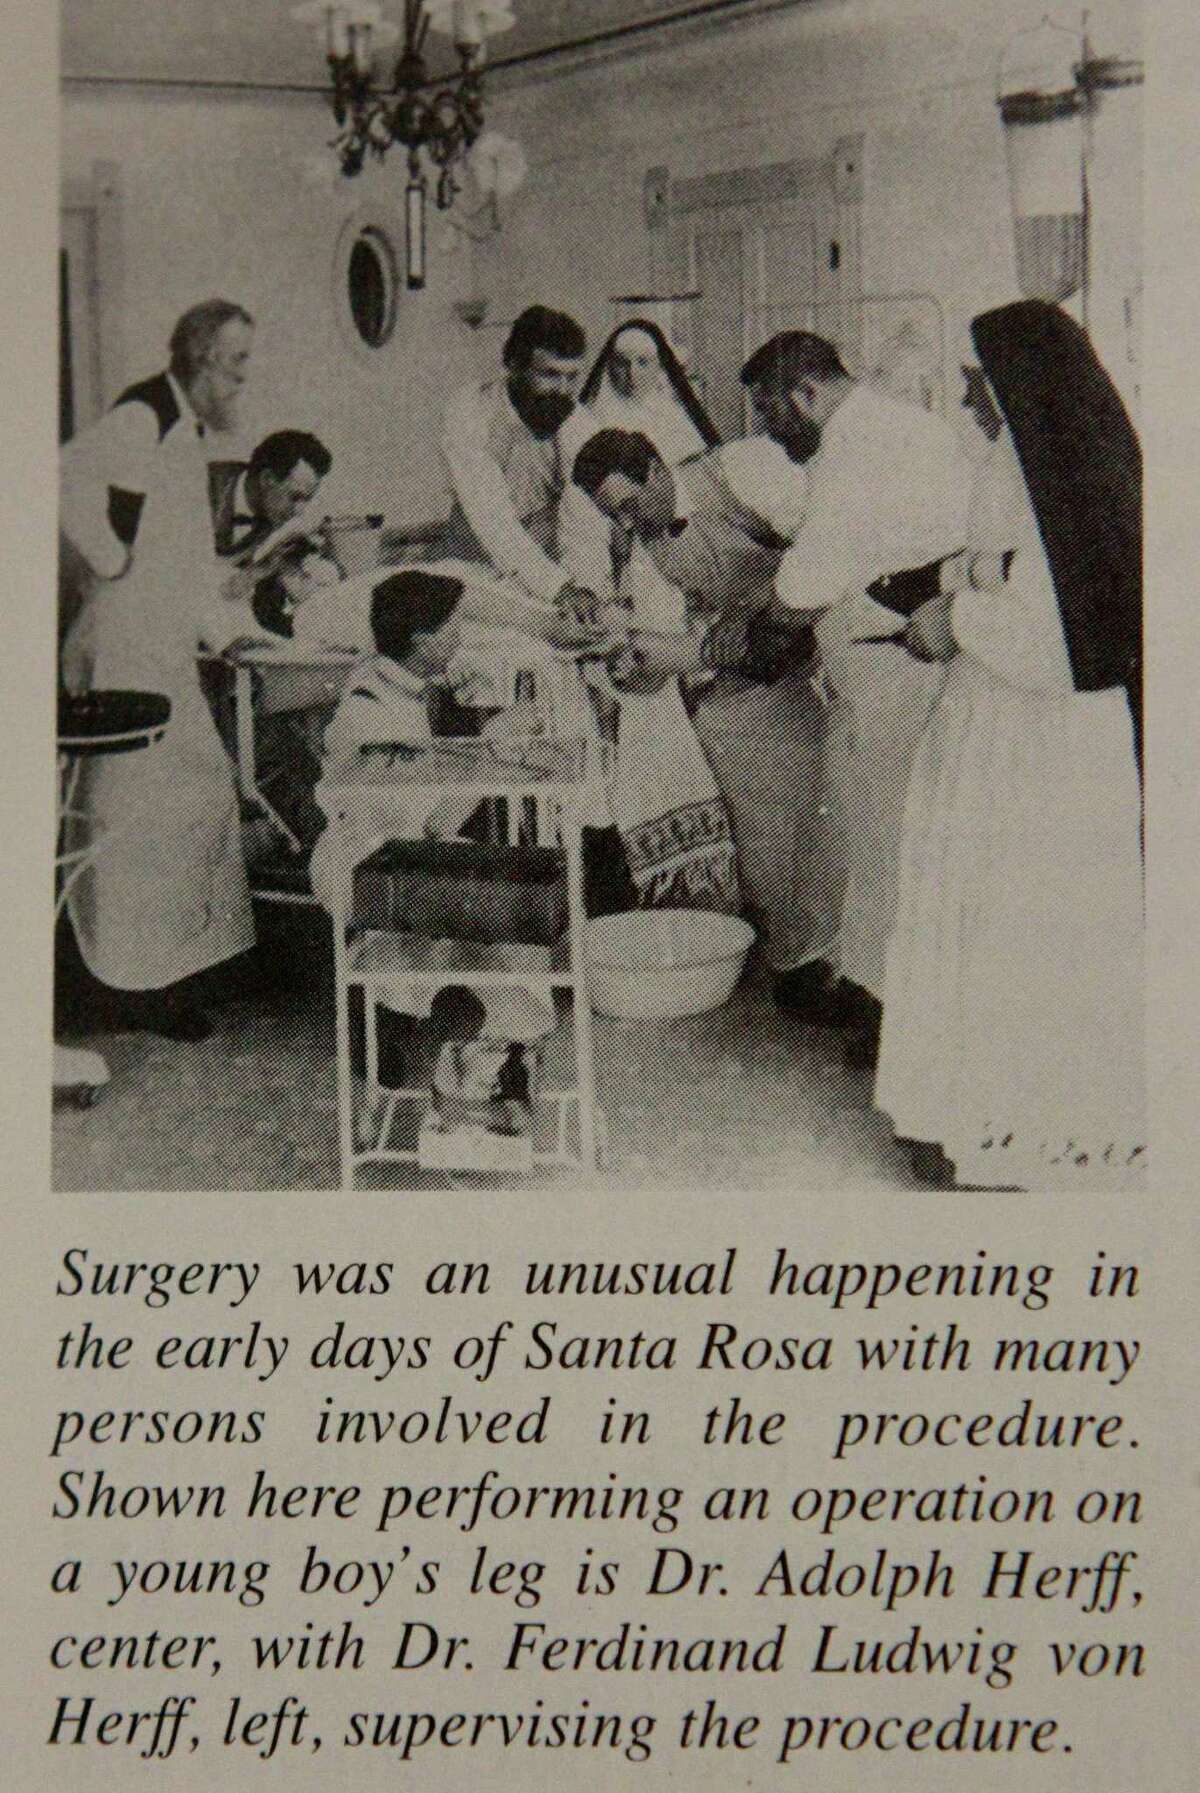 This picture copied from a book provided by the Sisters of Charity of the Incarnate Word Archives shows surgery being performed in the early days of Santa Rosa.